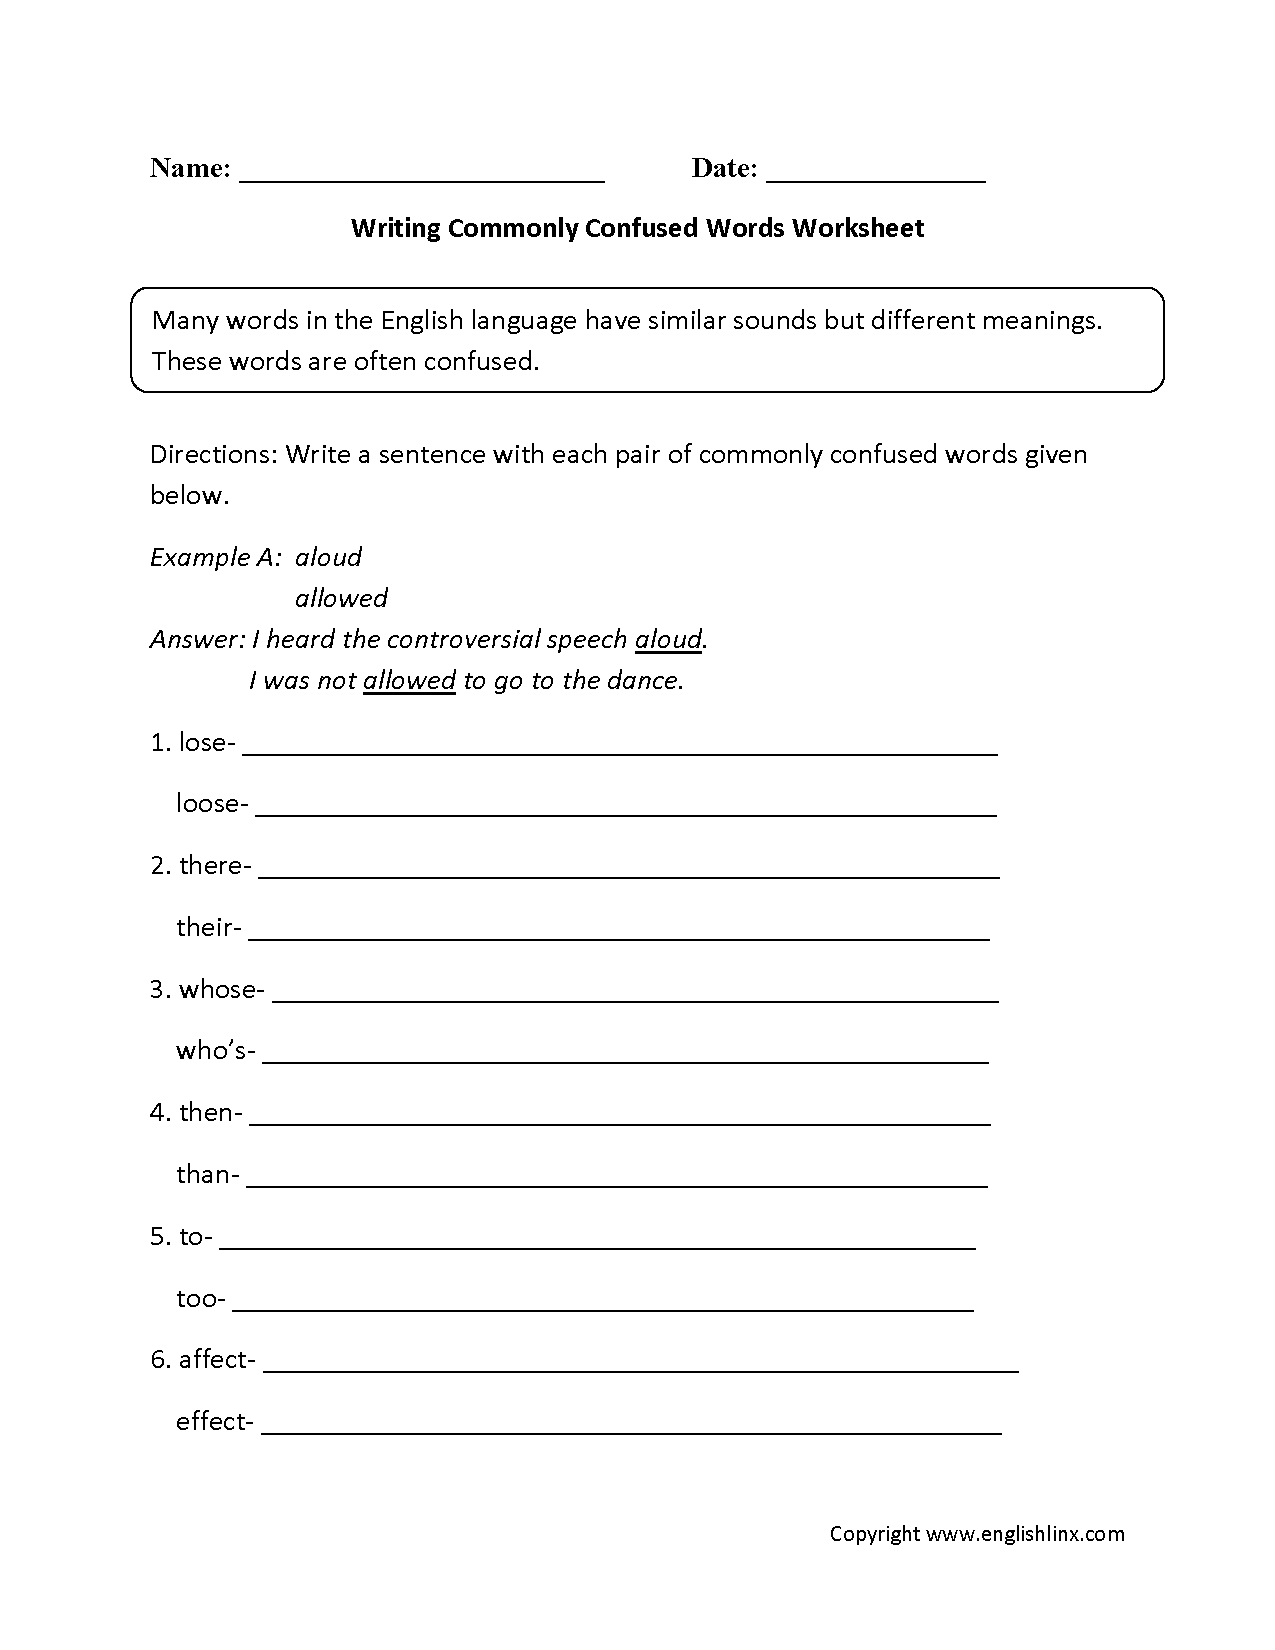 spelling-commonly-confused-words-worksheet-for-4th-7th-grade